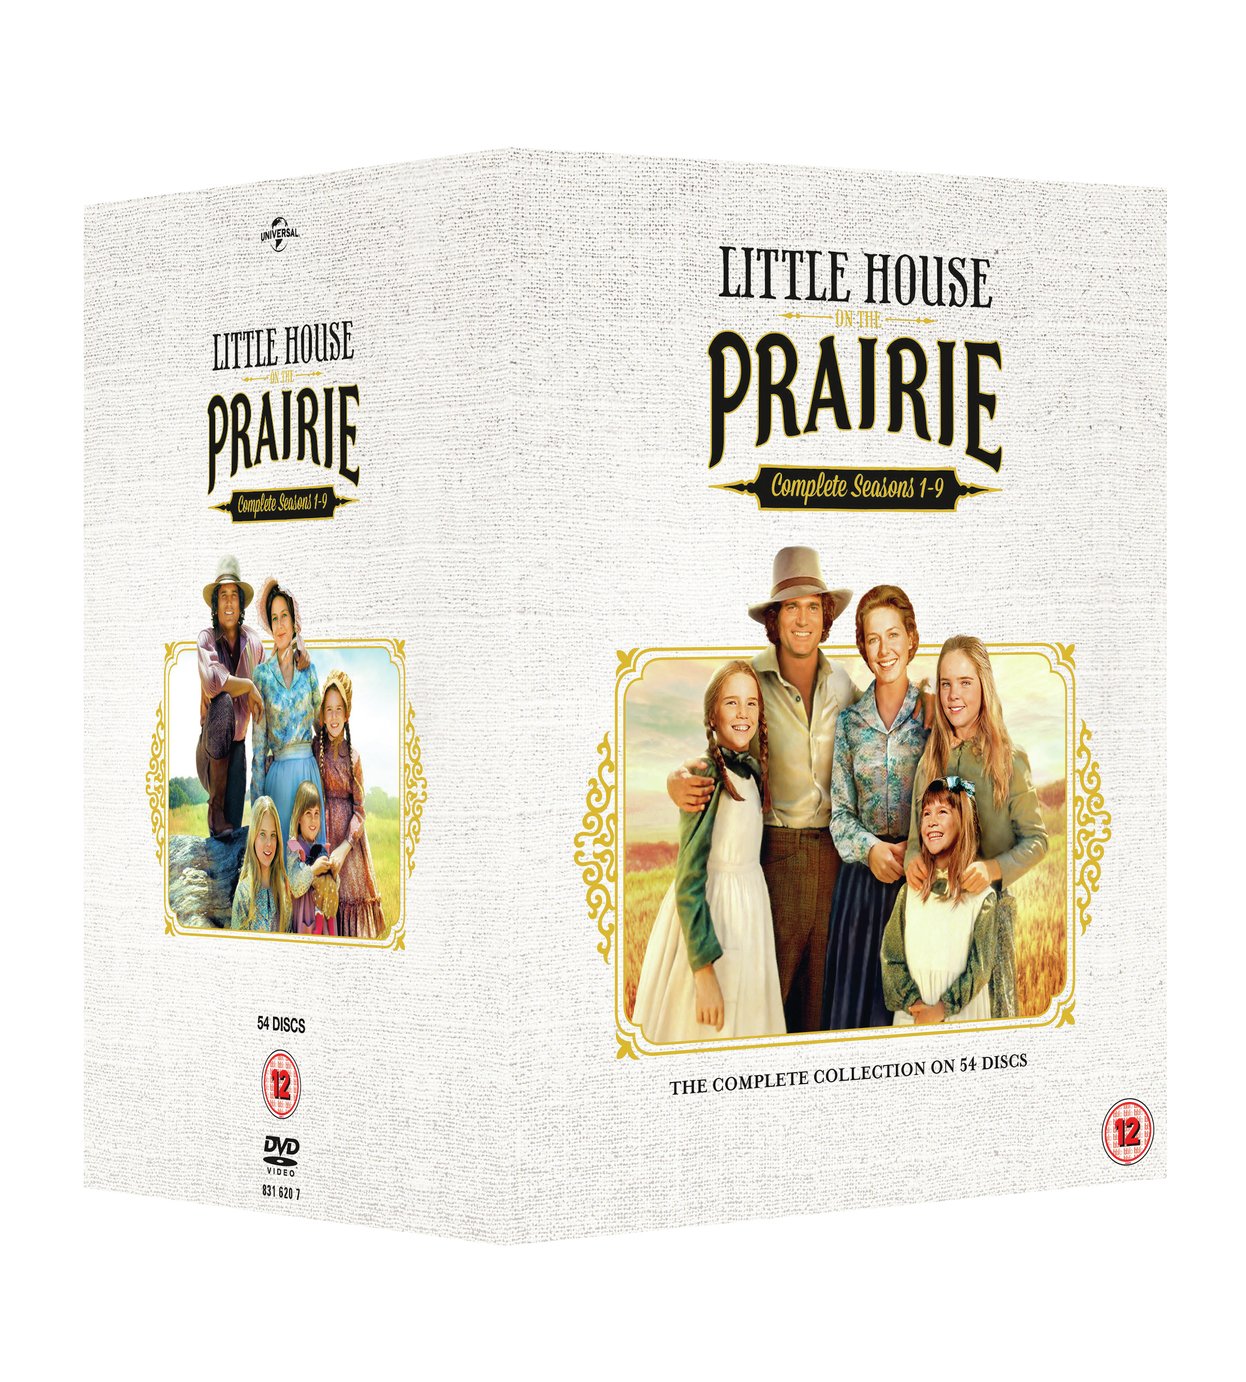 Little House on the Prairie DVD Box Set Review